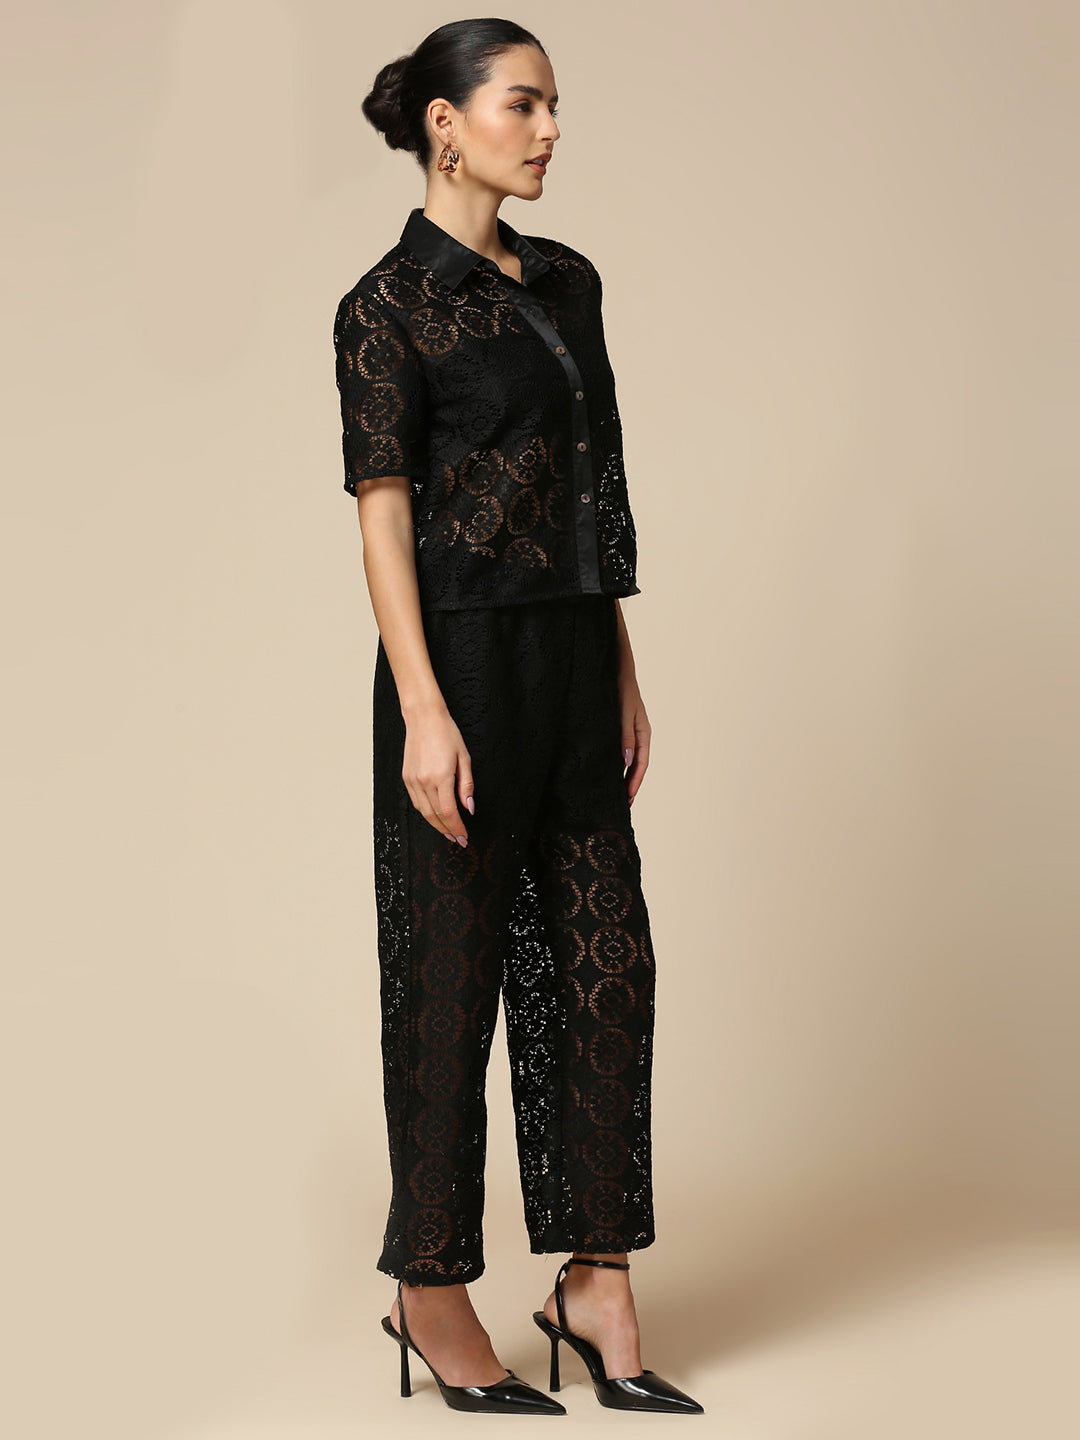 LACE HEAD TO TOE CO-ORD SET WITH SATIN TRIMMED SHIRT & LINED PULL ON PANTS